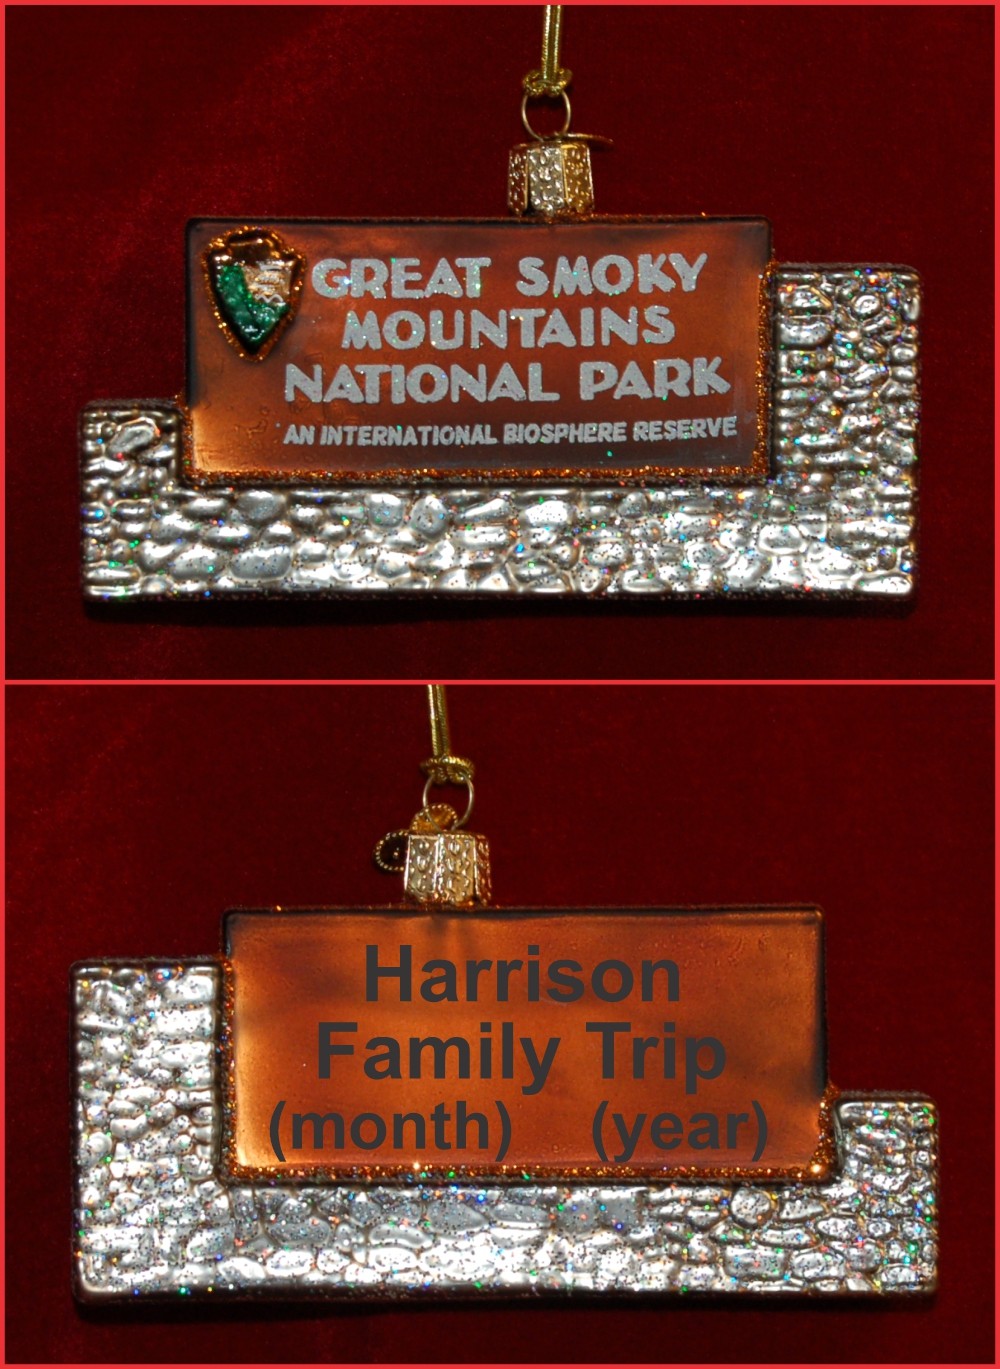 Great Smoky Mountains National Park Christmas Ornament Personalized by RussellRhodes.com